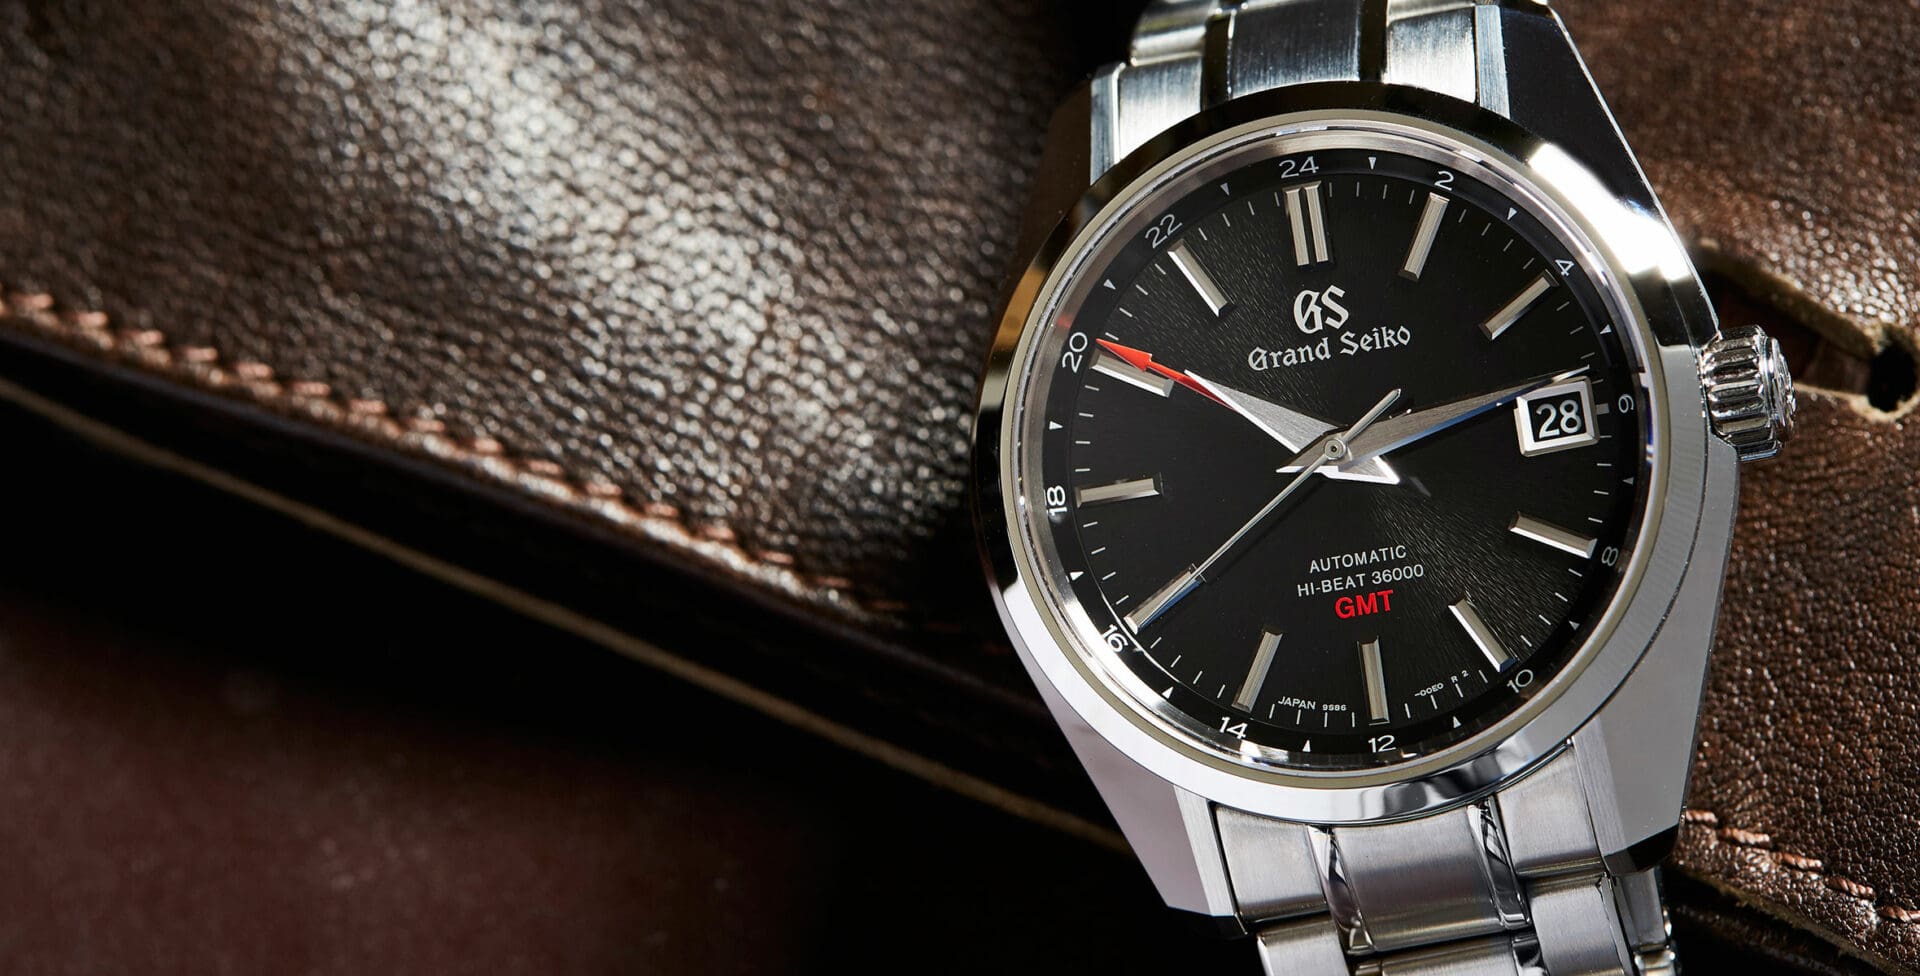 VIDEO: One watch to do it all – The Grand Seiko Hi-Beat GMT SBGJ203